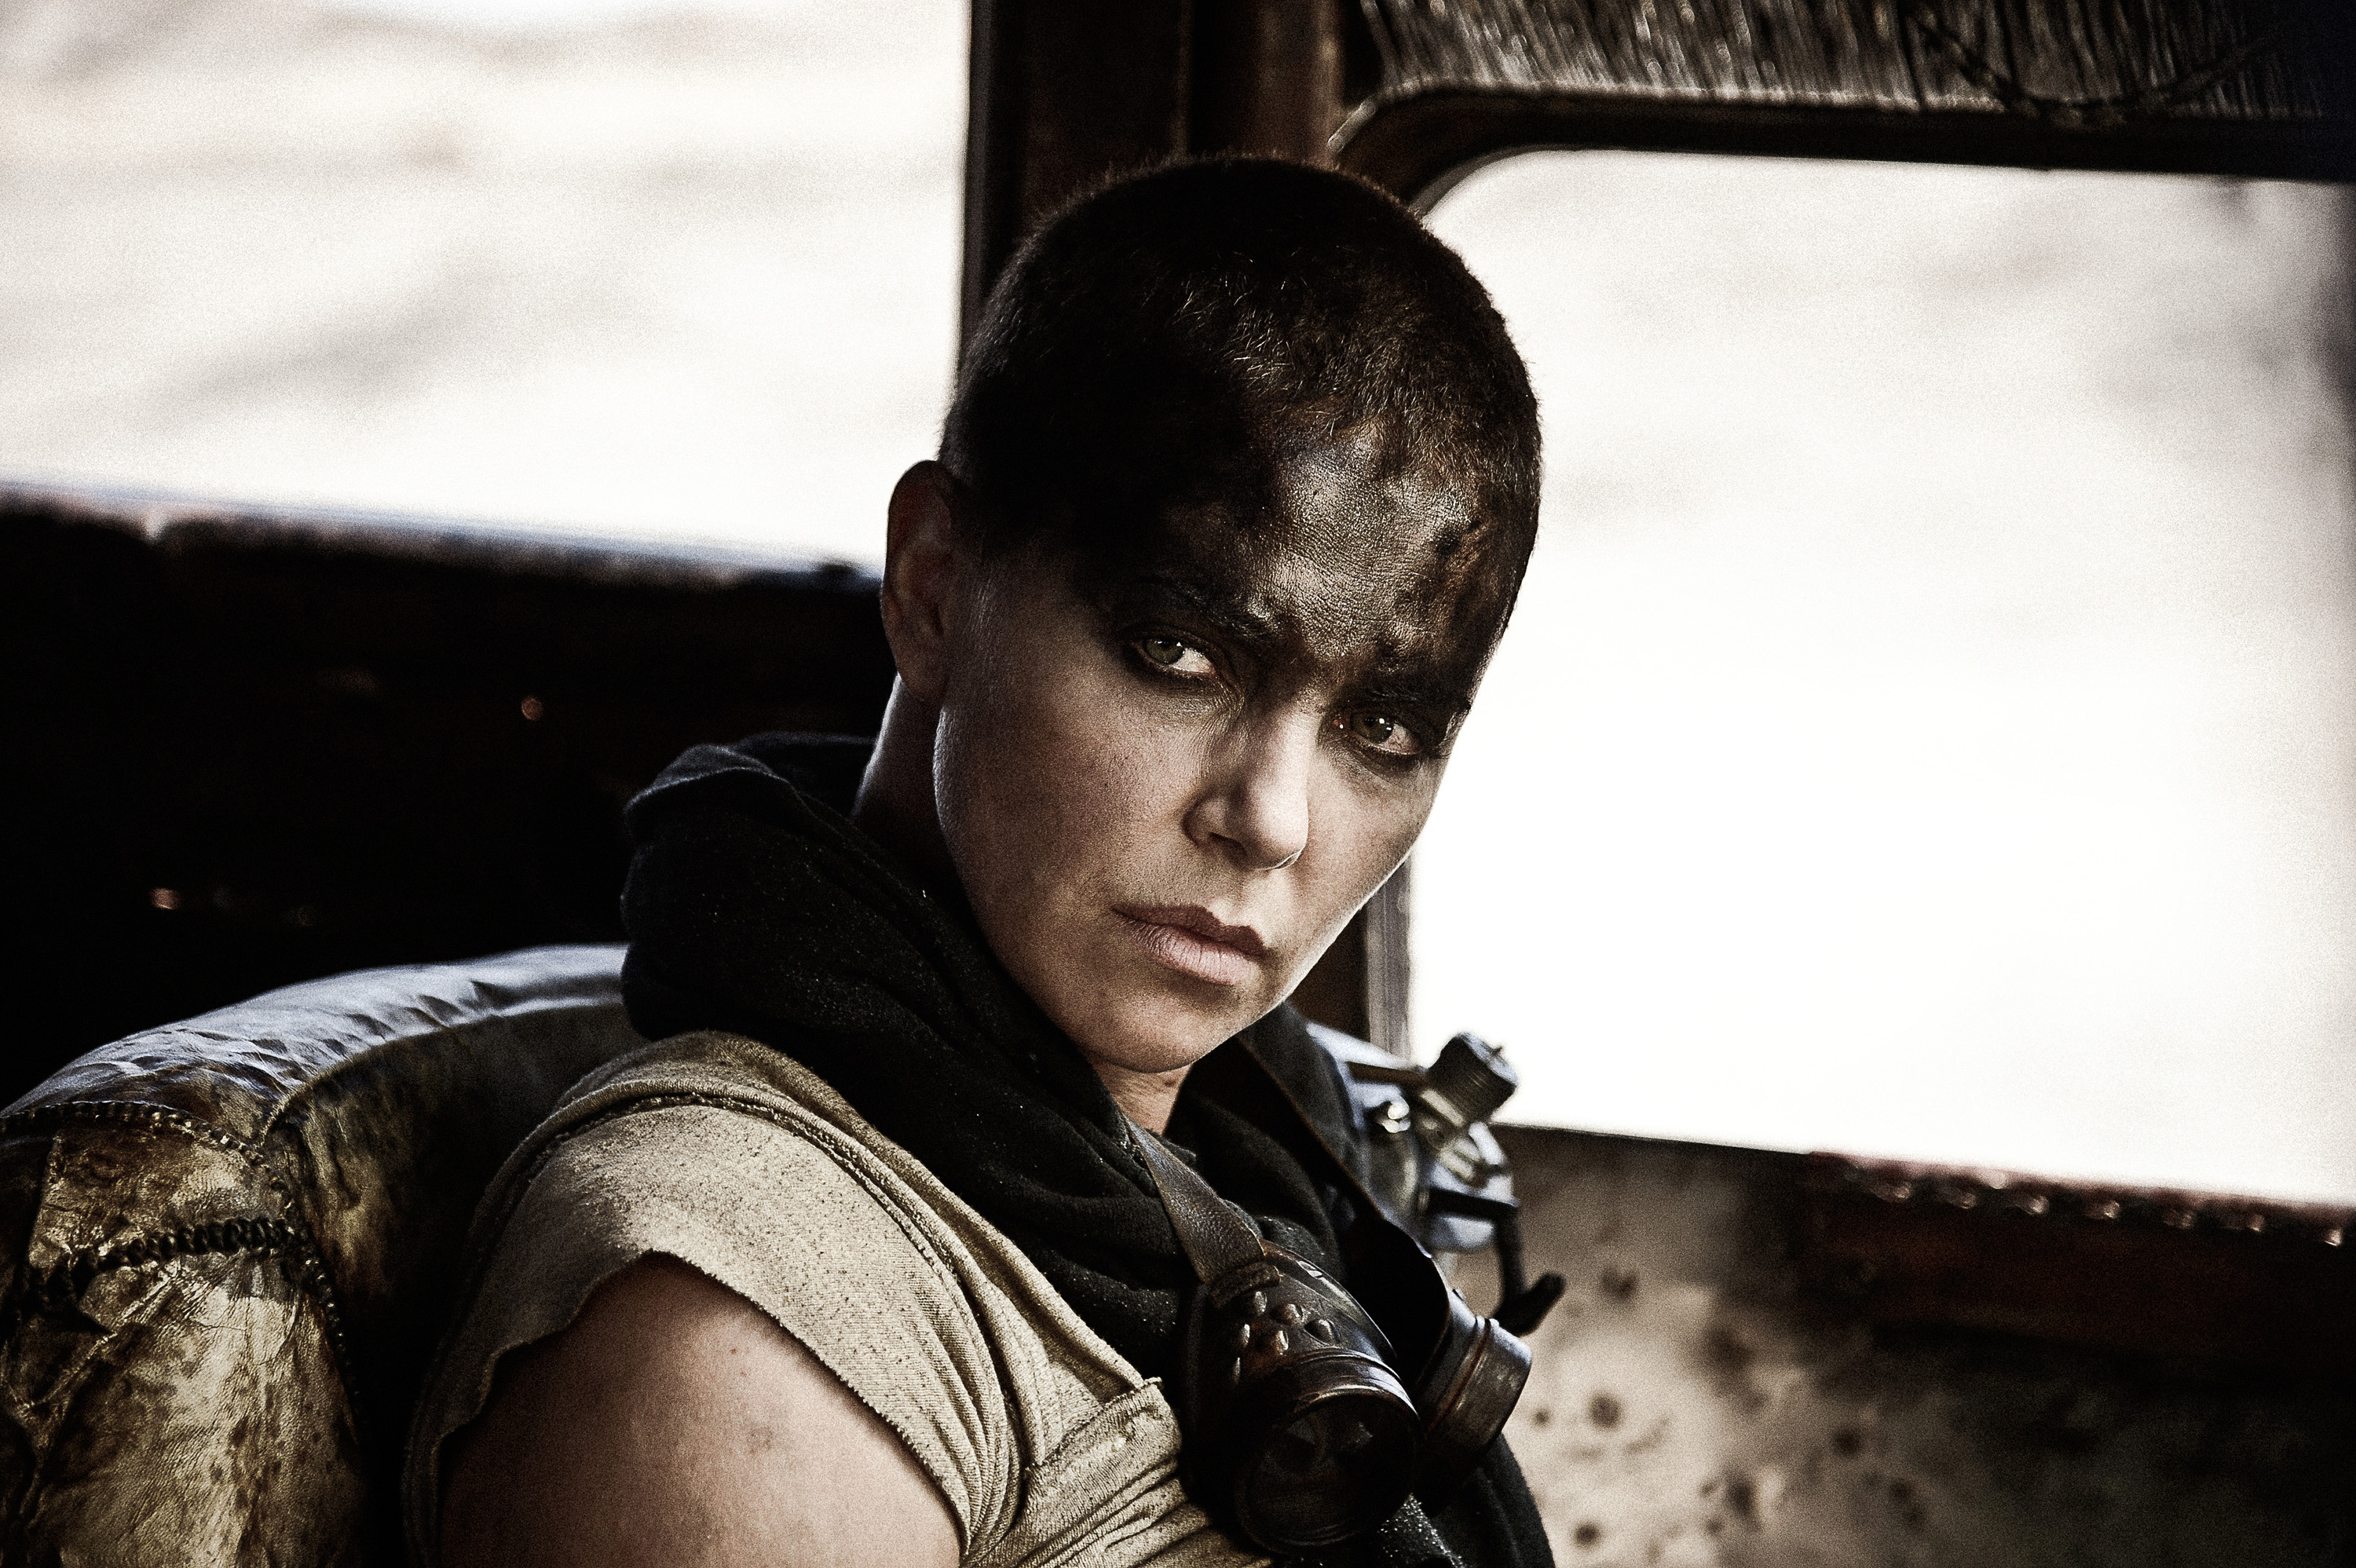 Charlize Theron played the older version of Imperator Furiosa in Mad Max: Fury Road